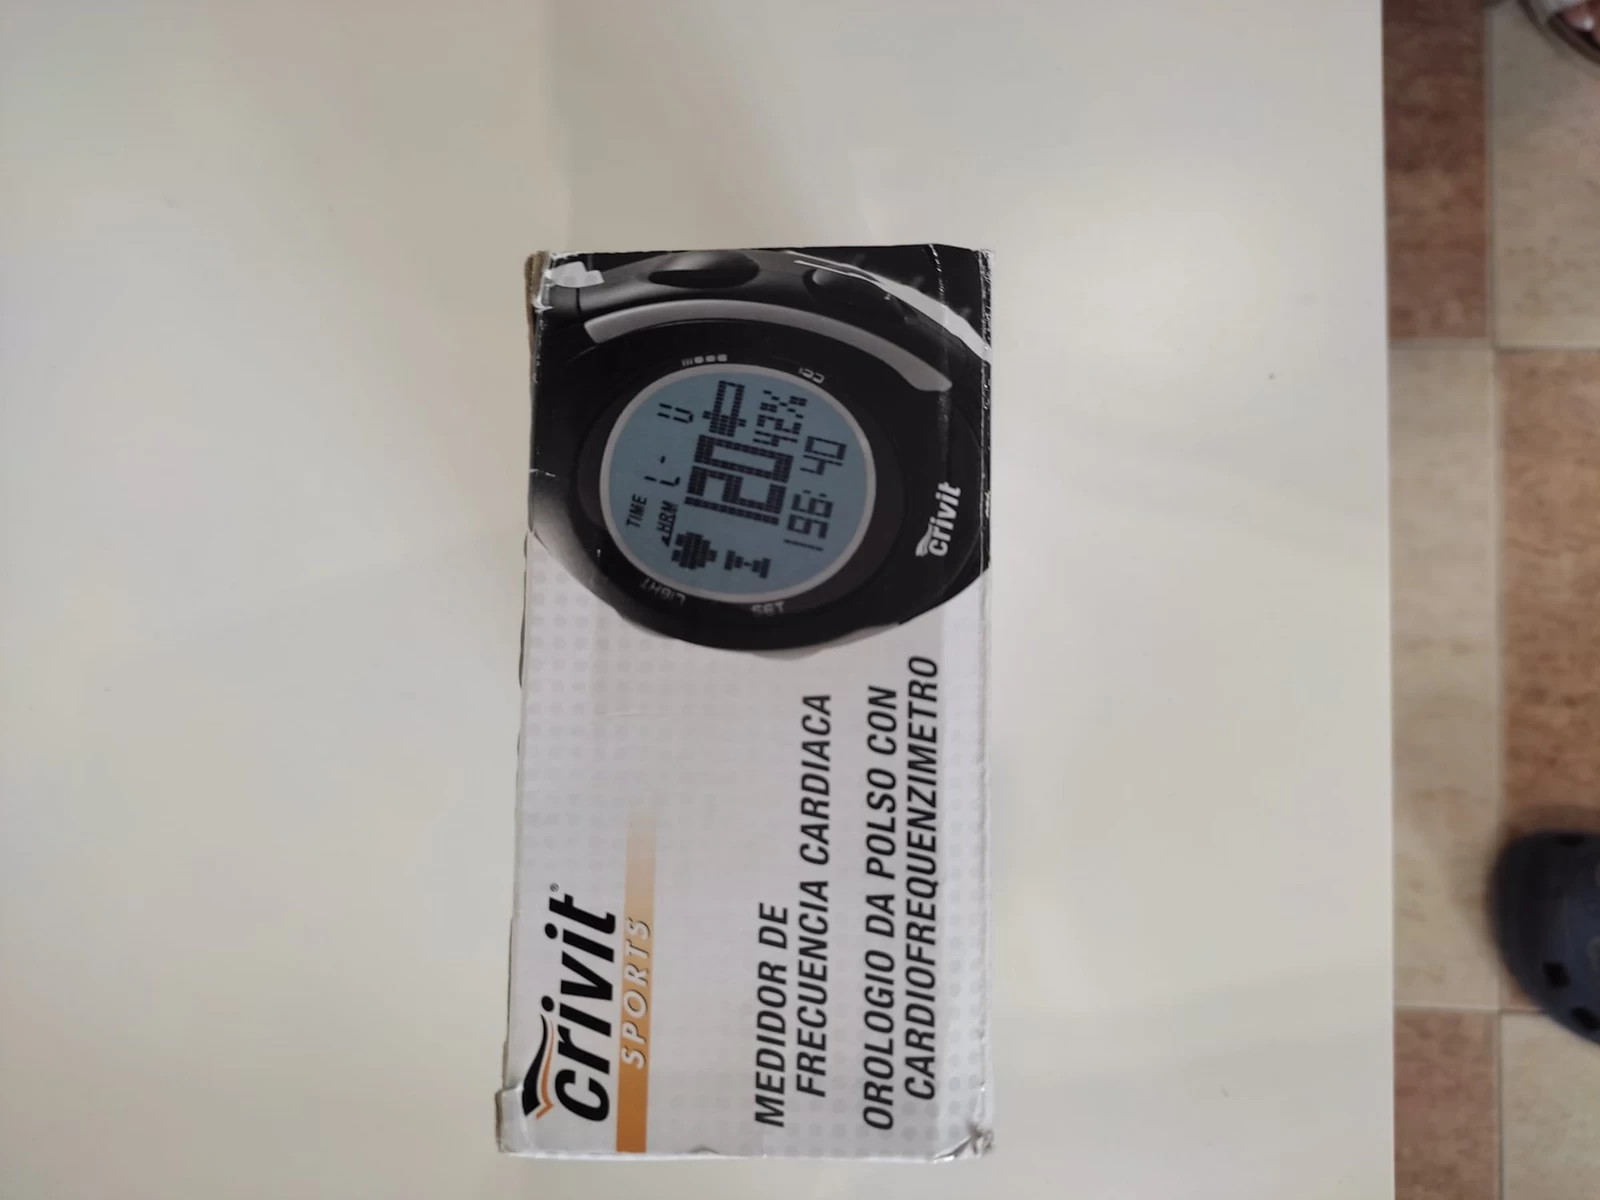 Crivit sports heart rate monitor brand new in box €29 №3950193 in Larnaca -  Activity trackers - sell, buy, ads on bazaraki.com